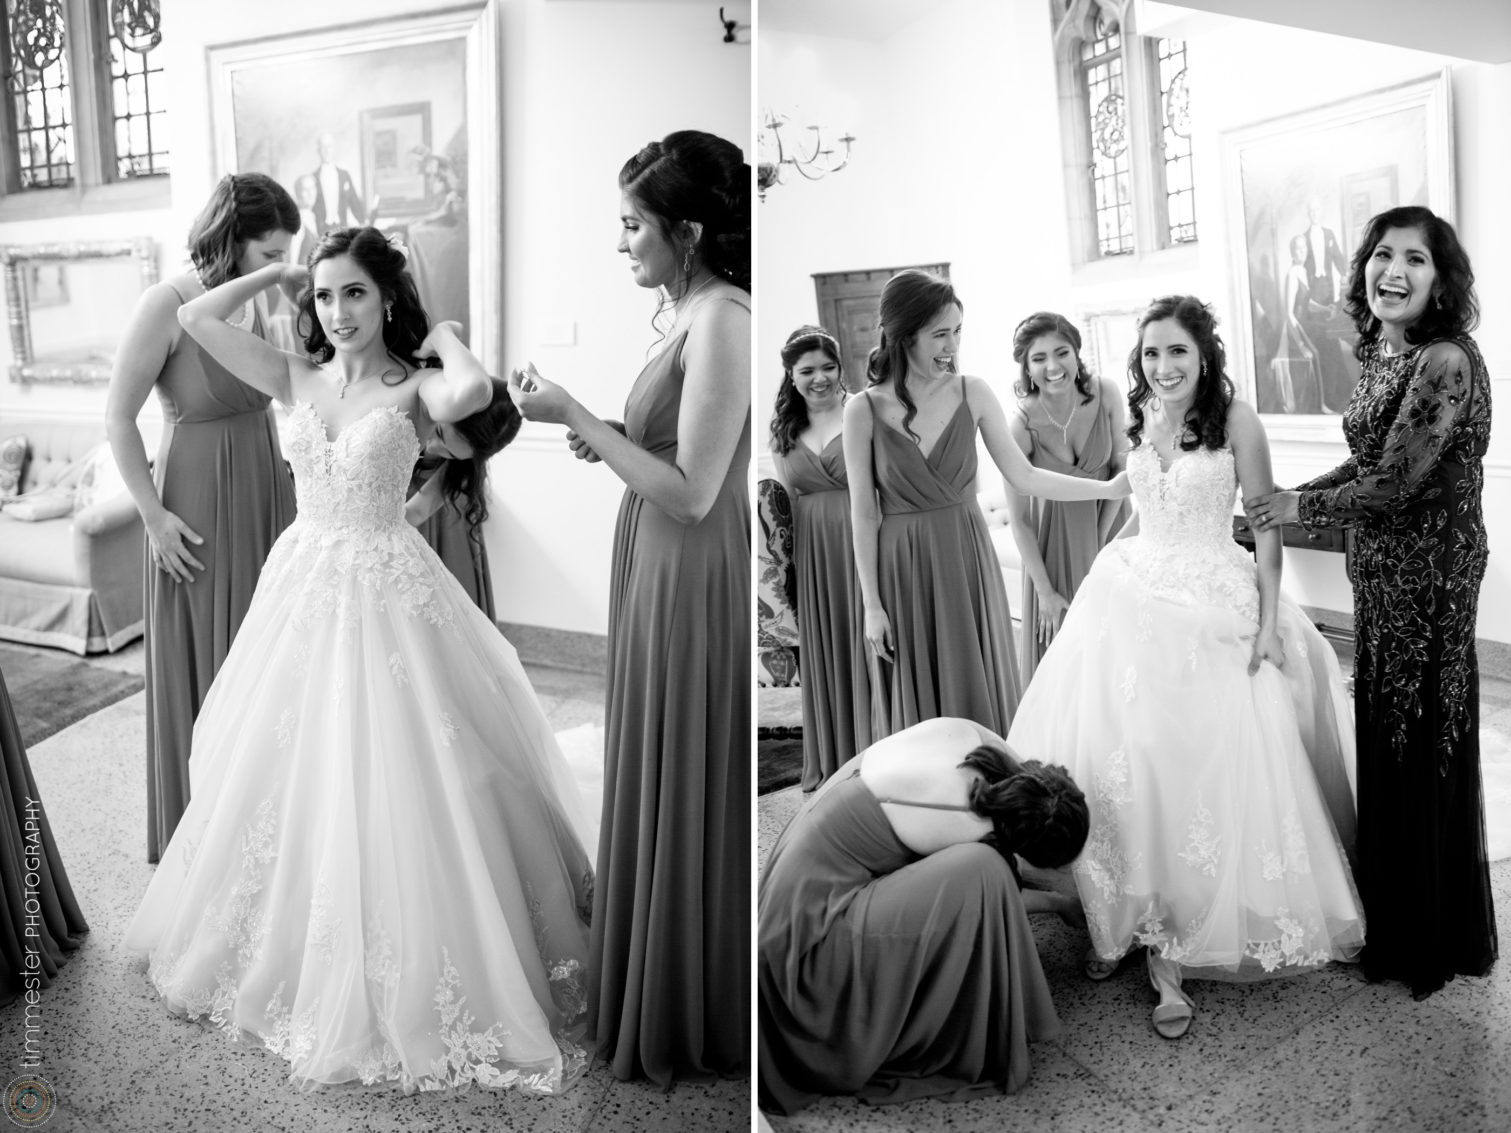 A bride gets ready for her wedding at Duke University Chapel in North Carolina